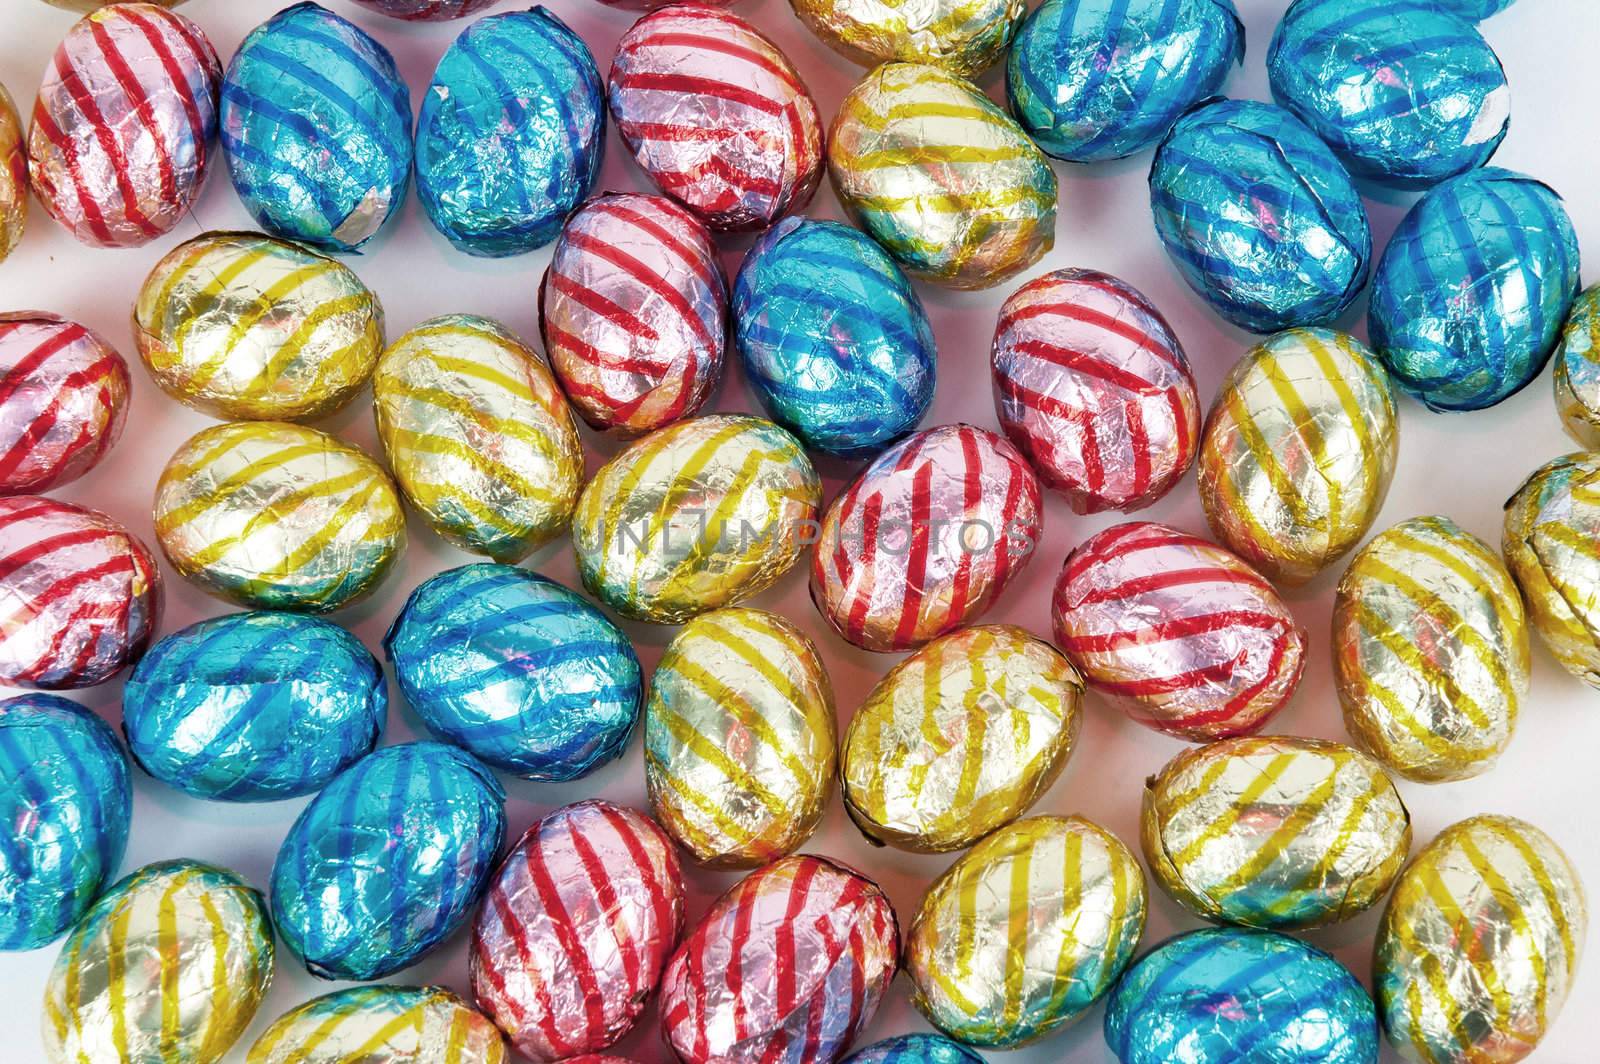 eastern chocolate eggs background by ladyminnie